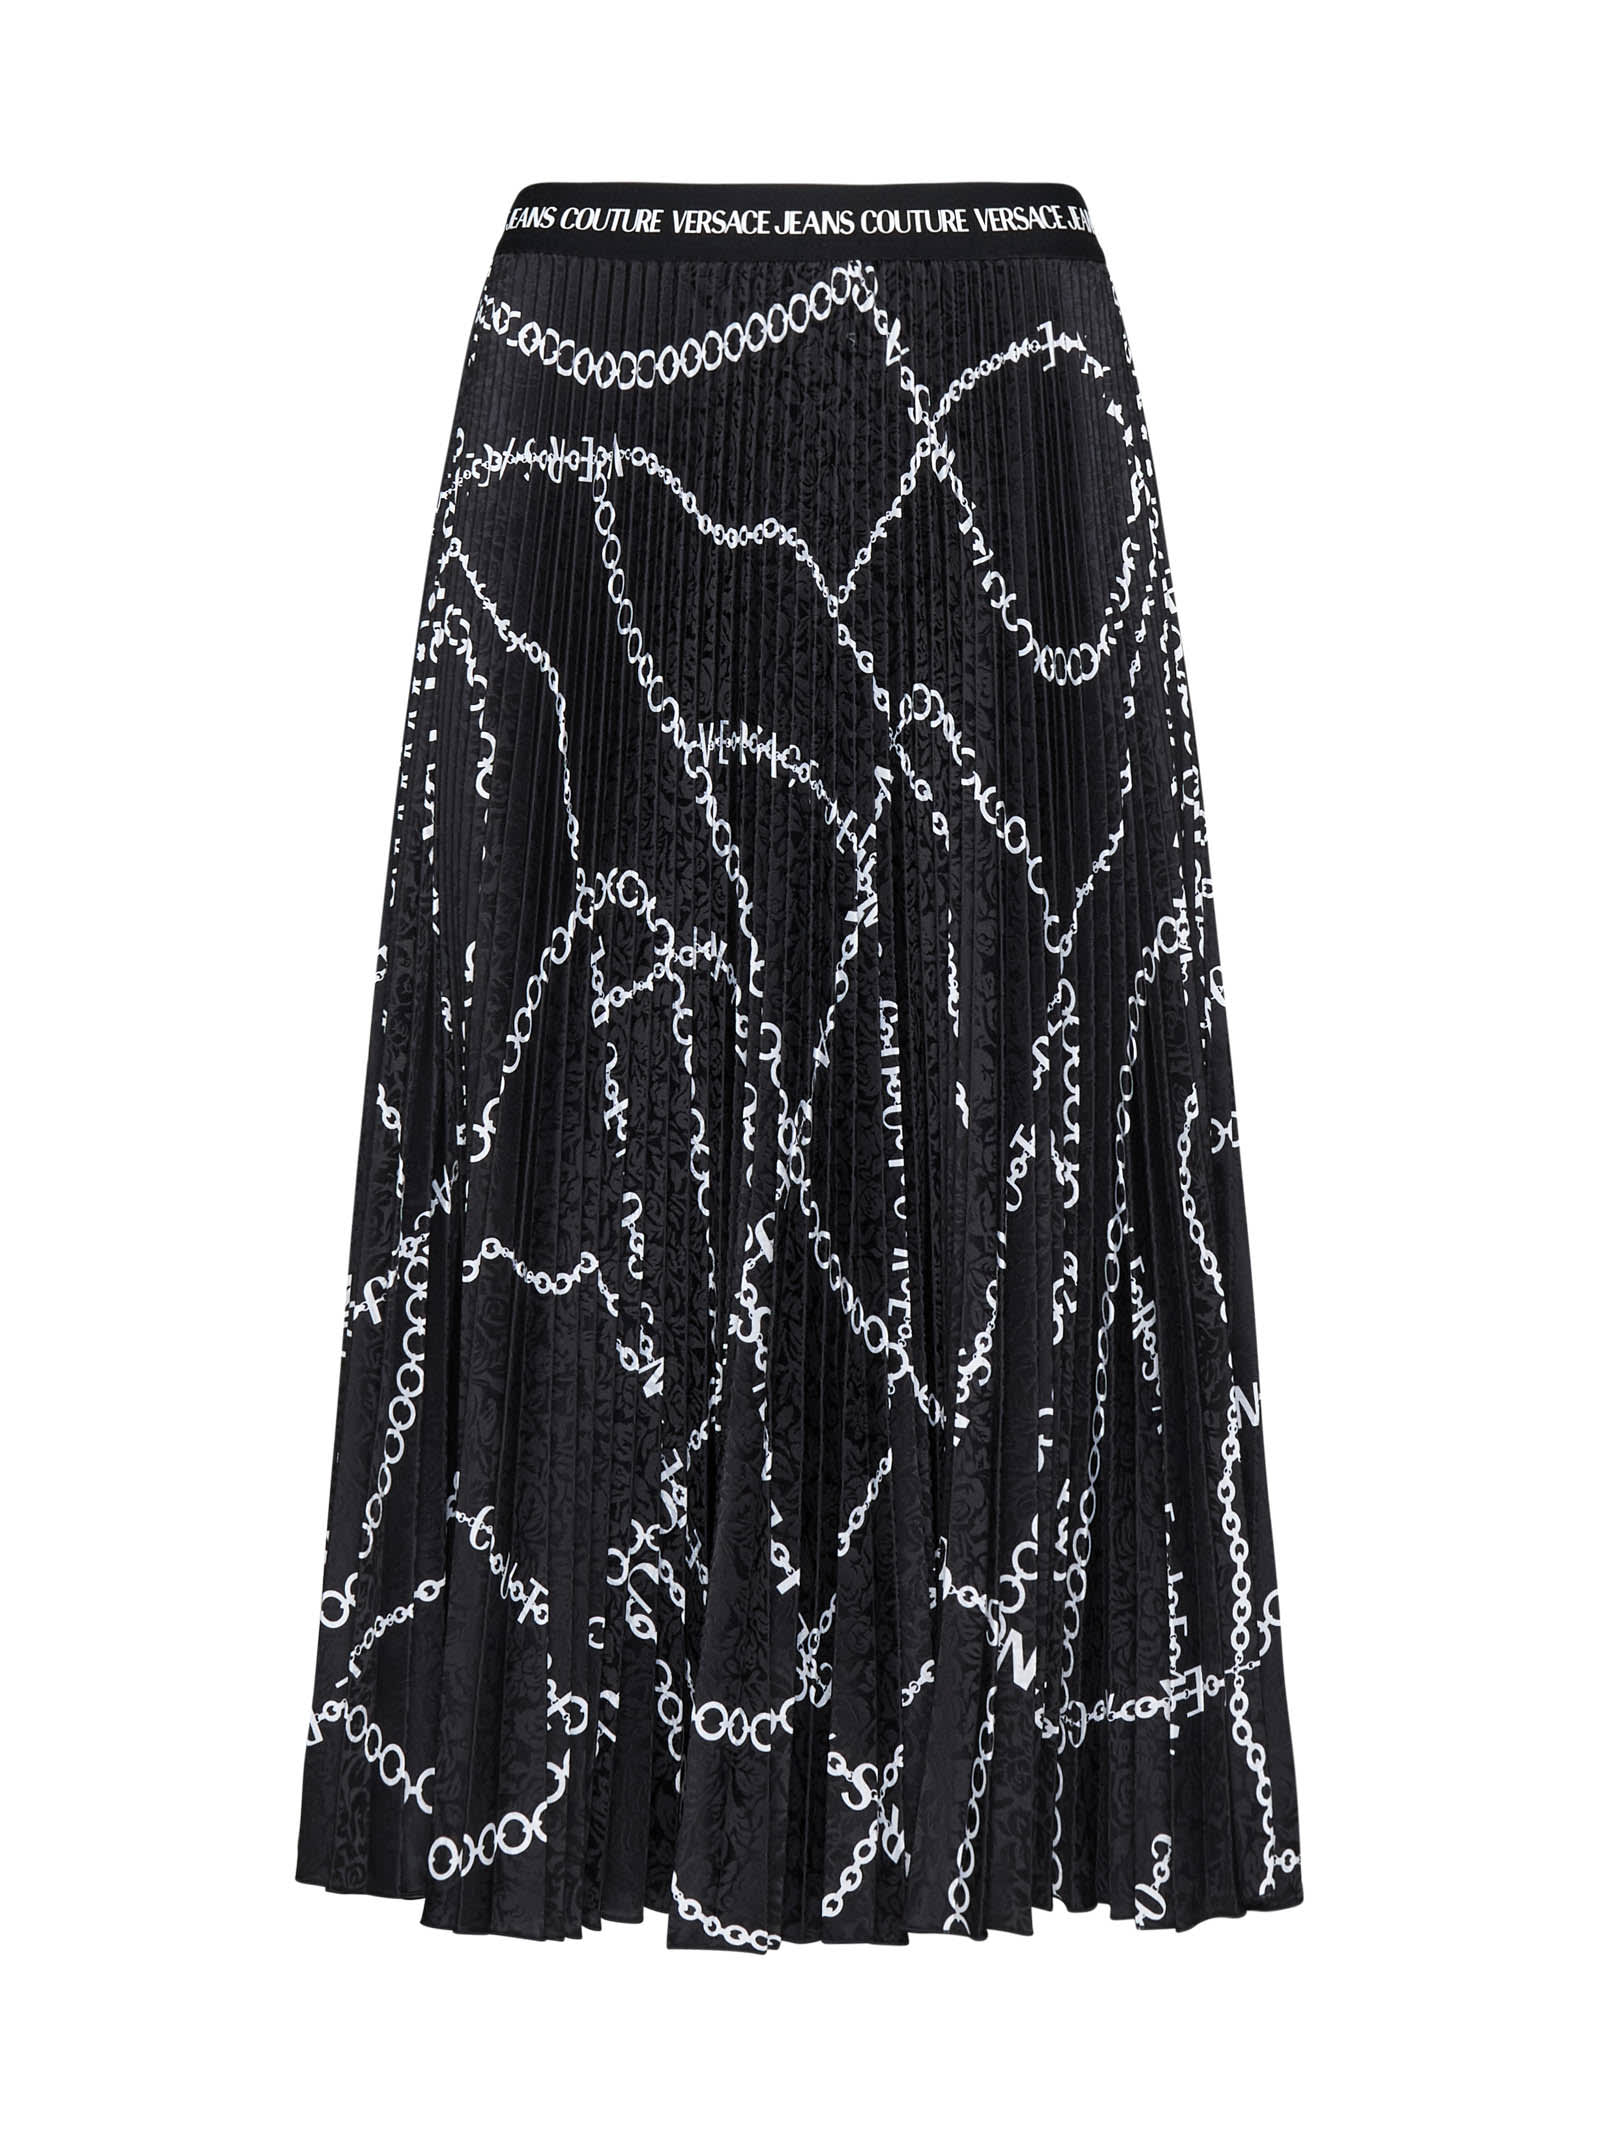 VERSACE JEANS COUTURE SKIRT